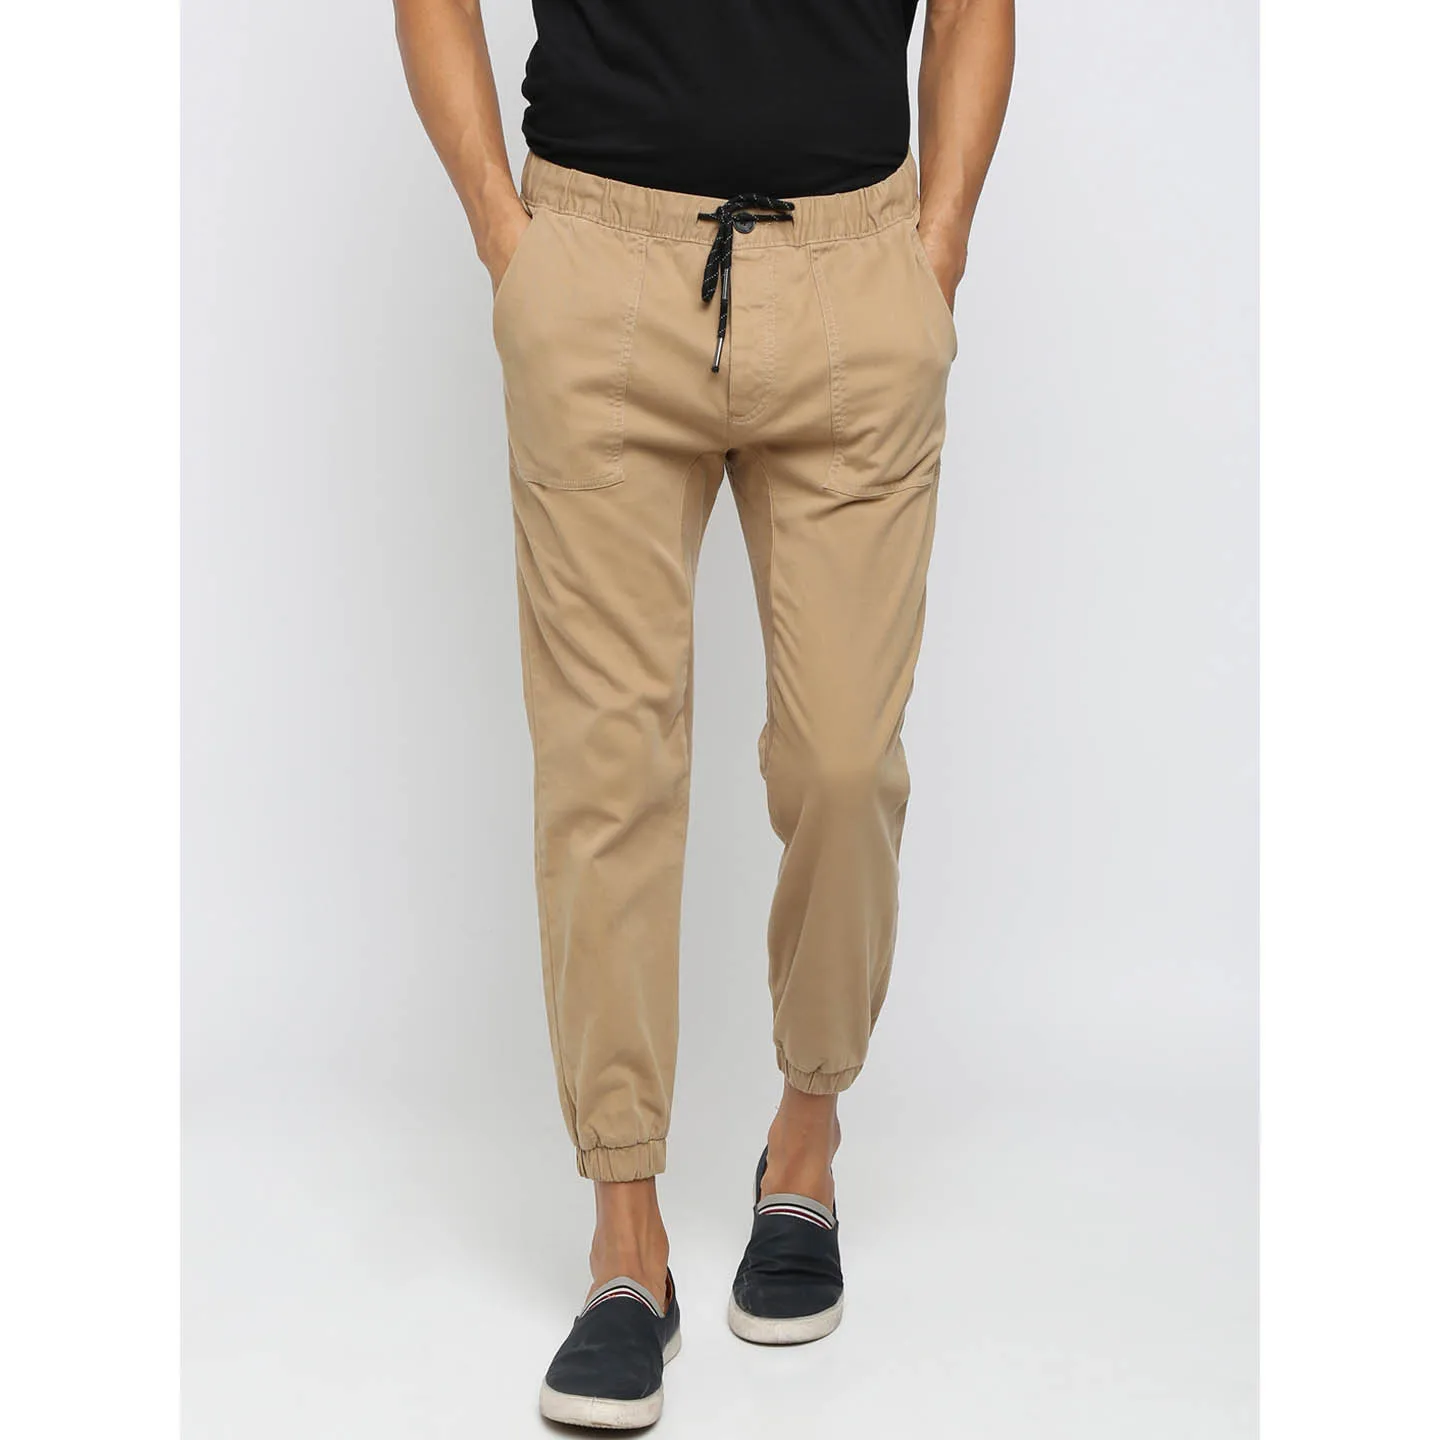 Mens Spring And Summer Casual Pants Mens Wild Cotton And Linen Loose Linen   eBay